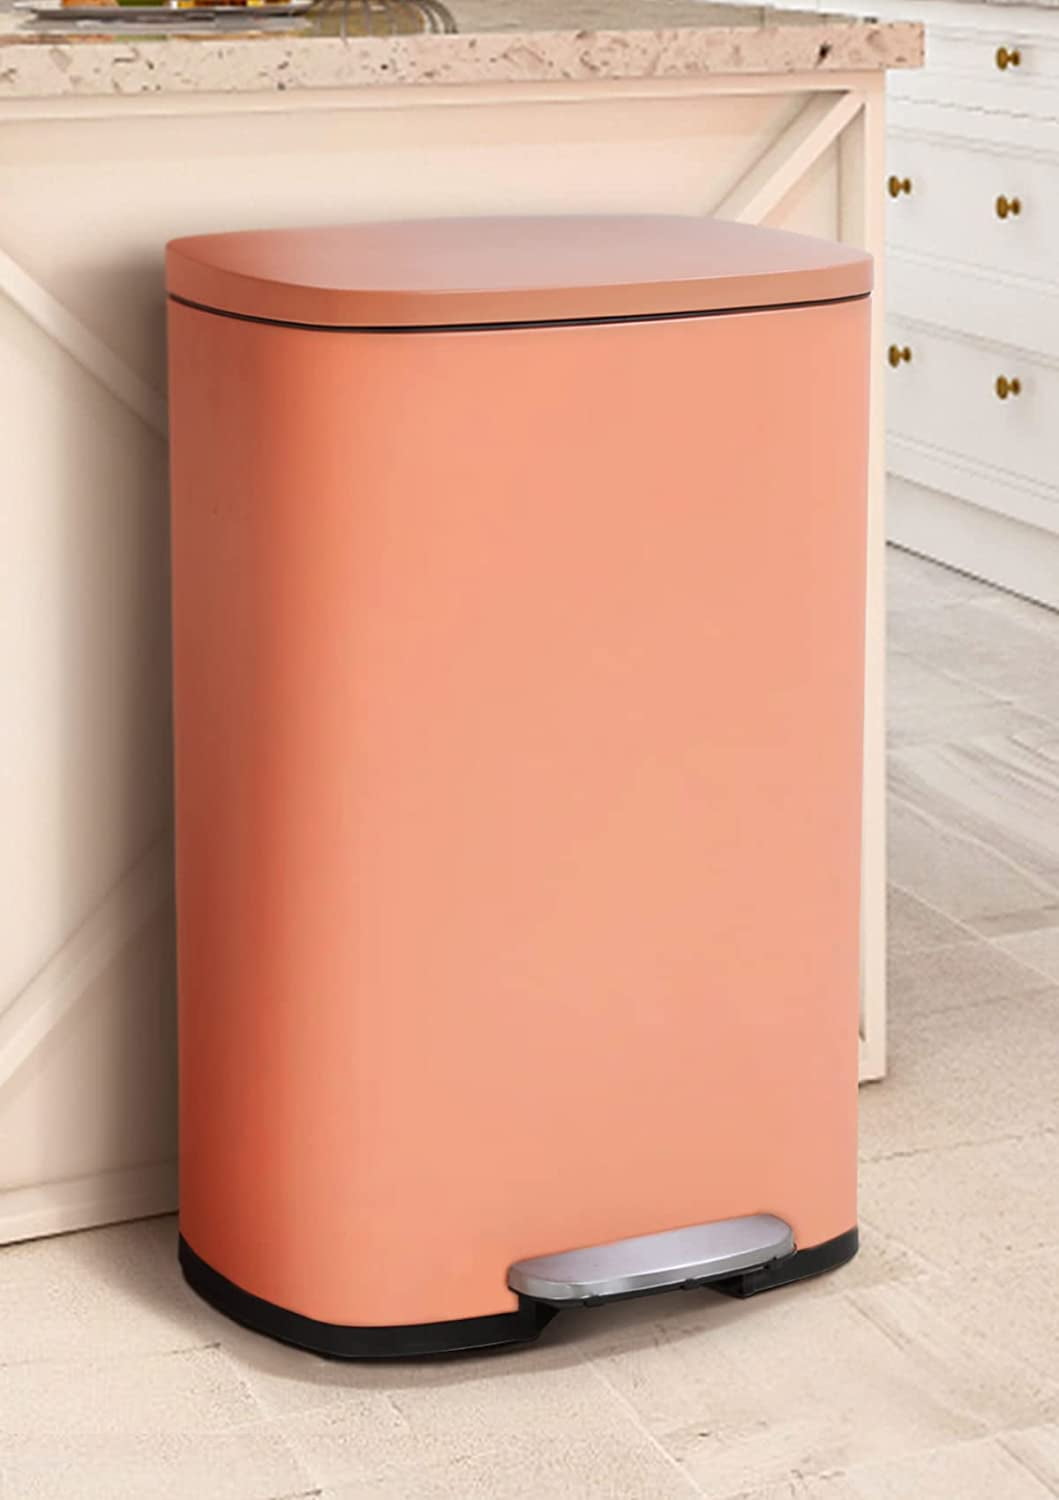 MoNiBloom 1.3 Gallon Trash Can with Step Pedal, Easy-Close Lid